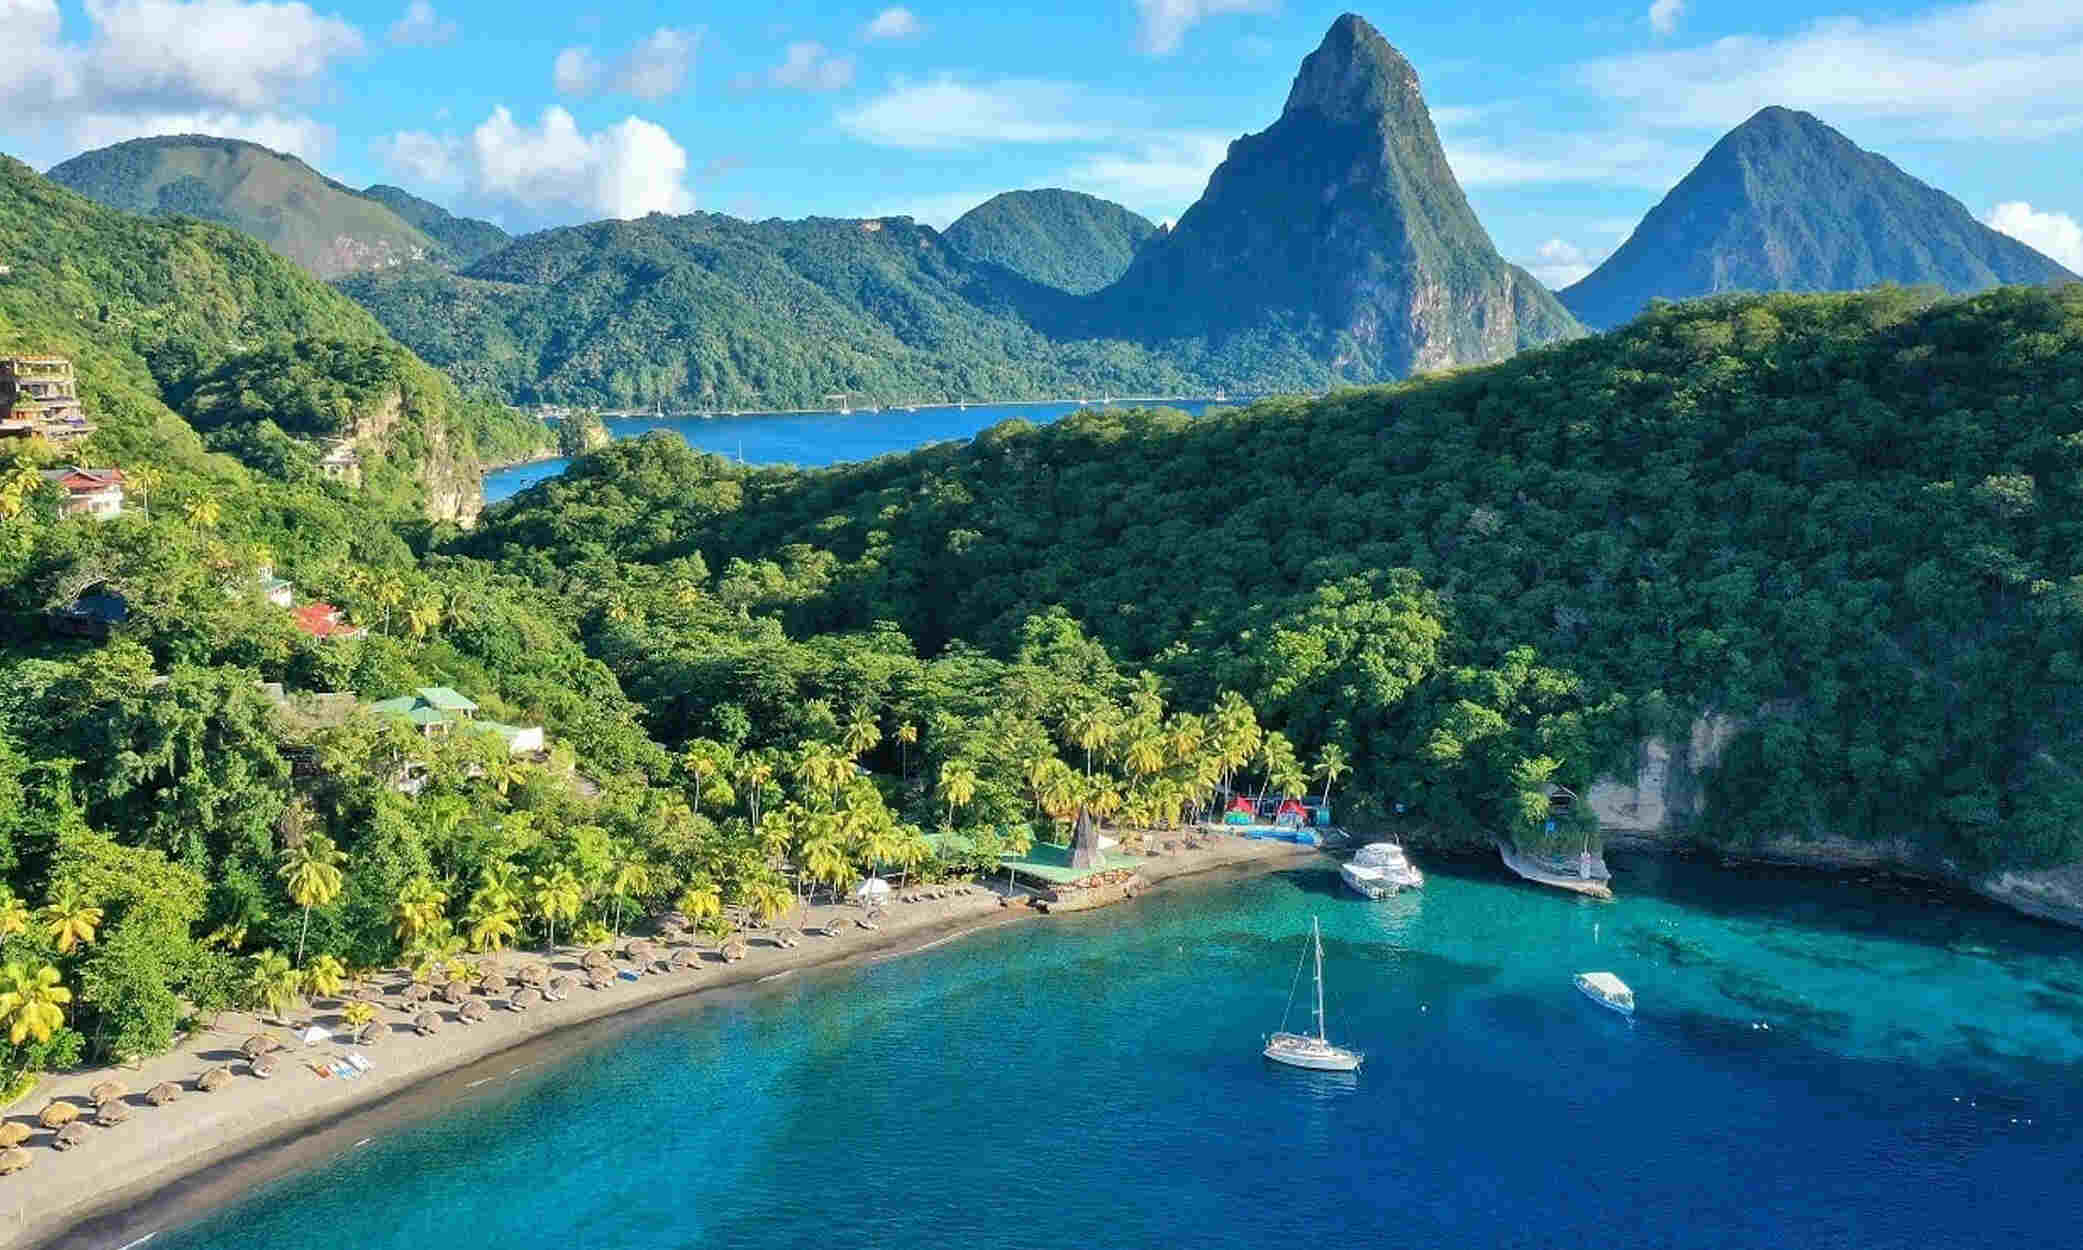 Introducing Anse Chastanet Resort, one of the best luxury resorts in St Lucia.